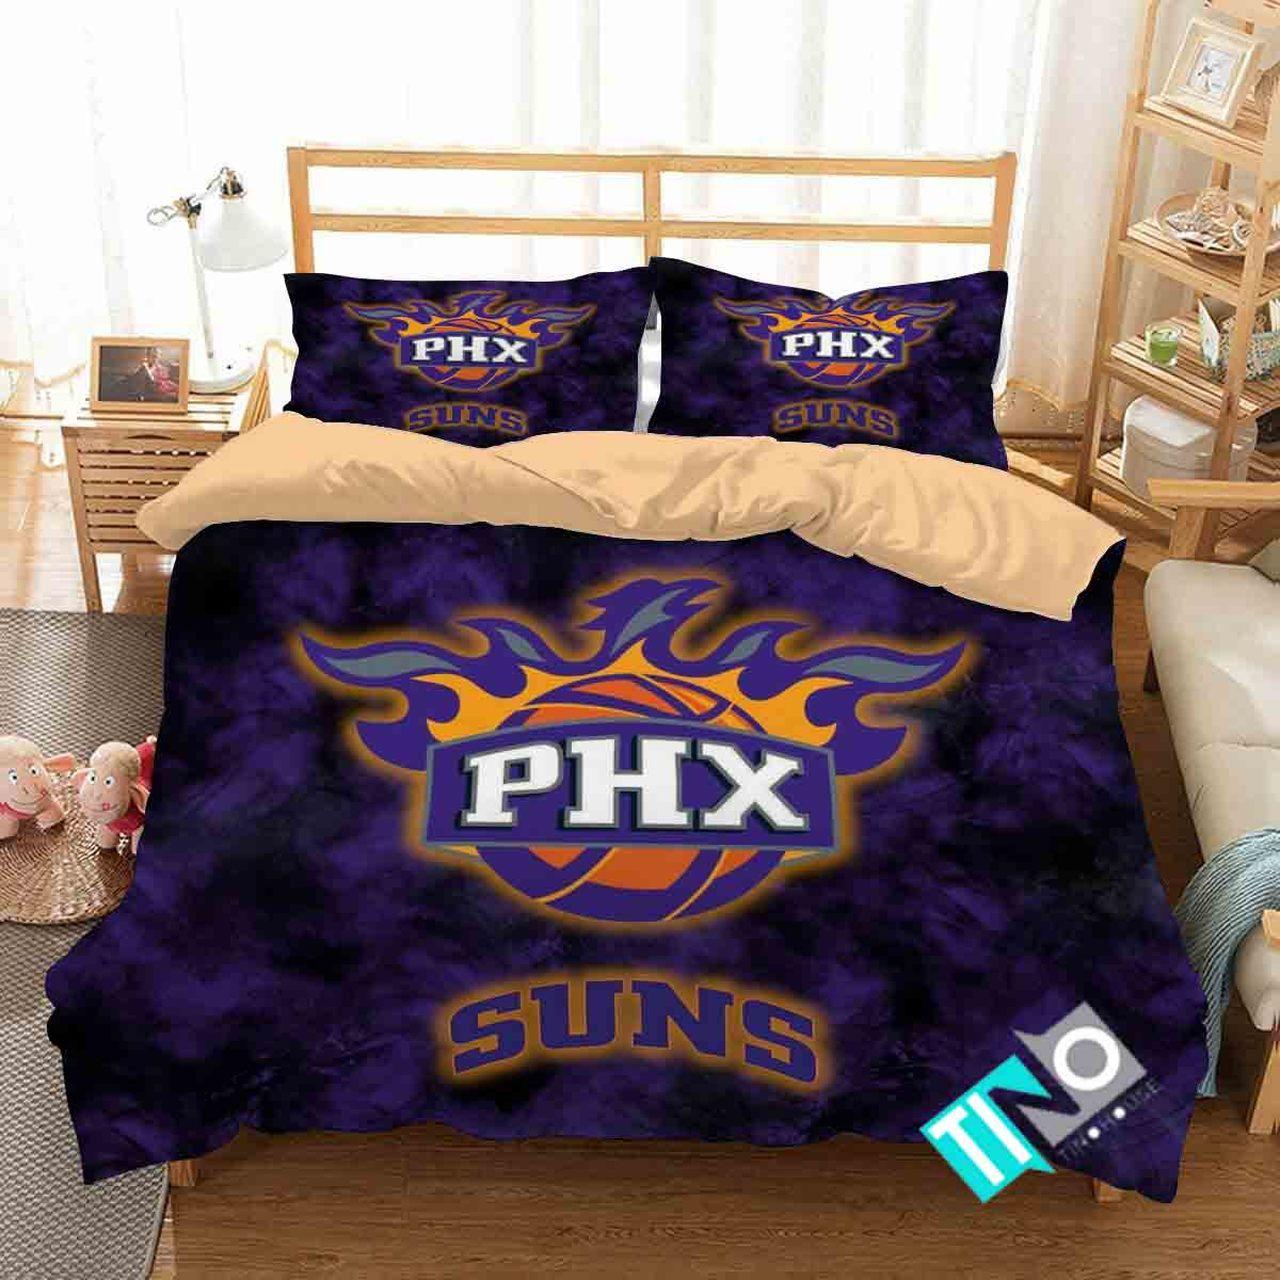 This type of bedding is perfect for year-round use and is very popular 97